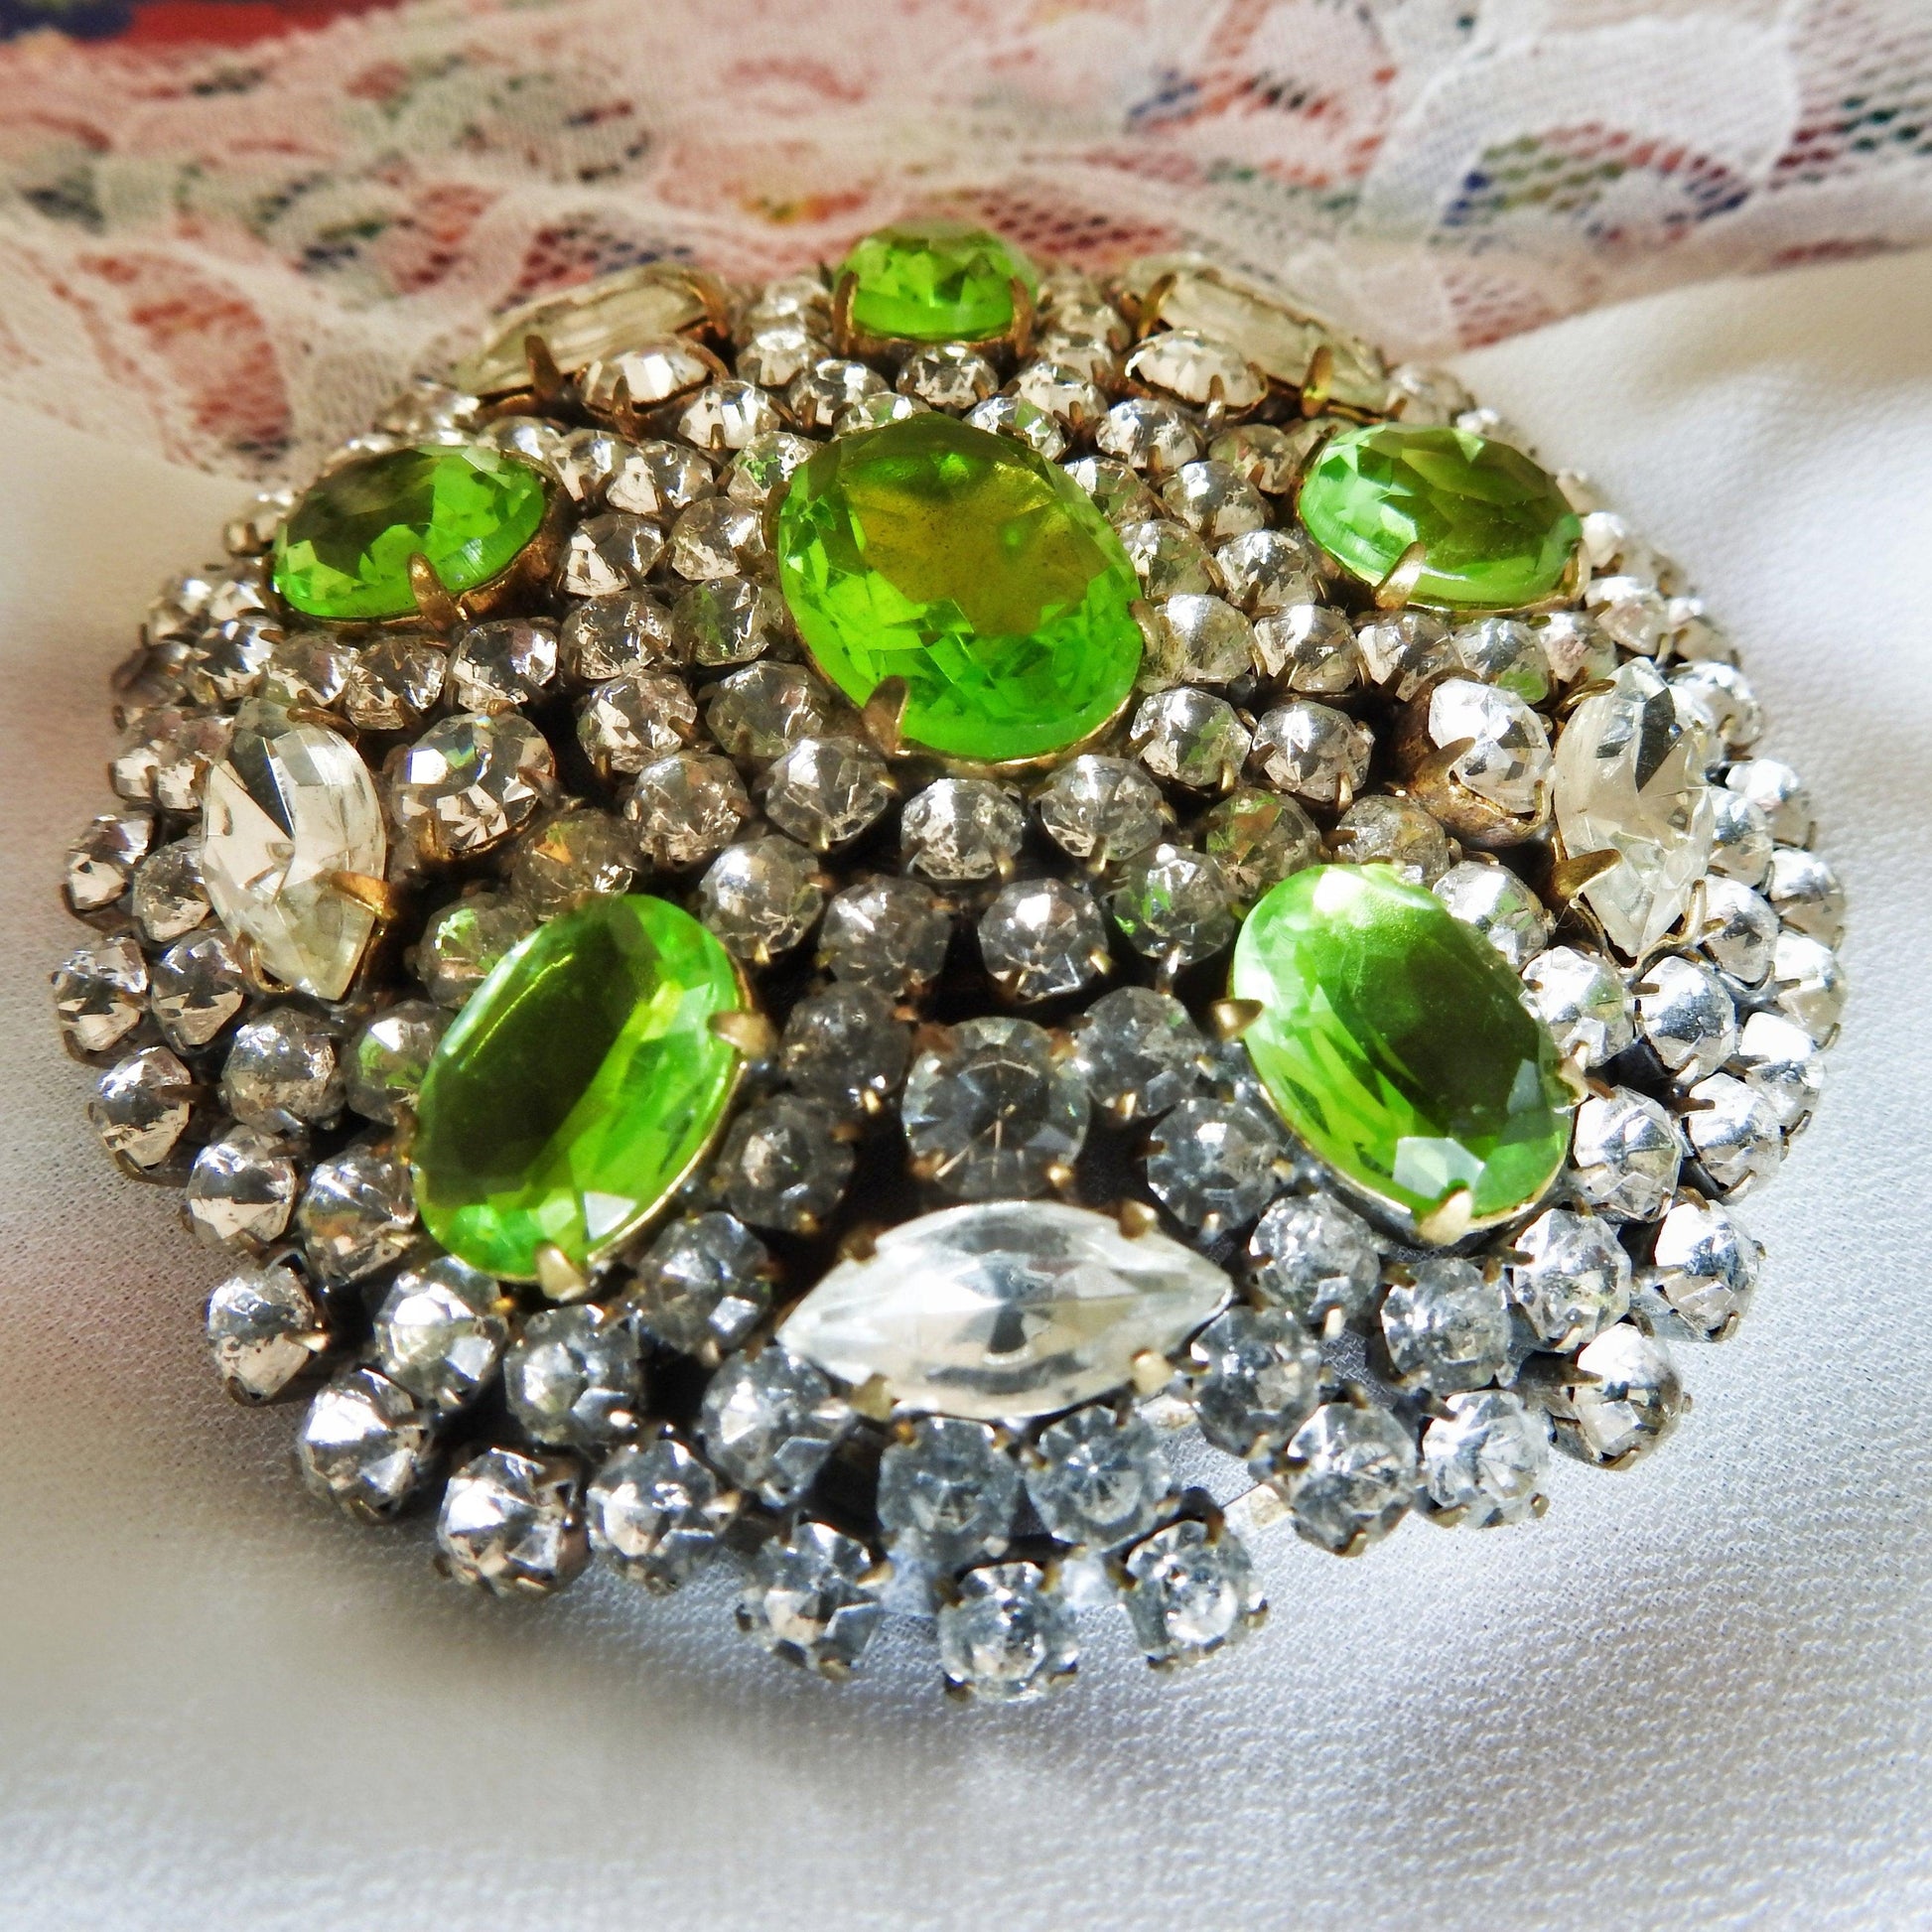 Elegant Austrian crystal brooch pin, retro green brooch, jewelry gift for her from husband, unique broach costume jewelry, gift for wife